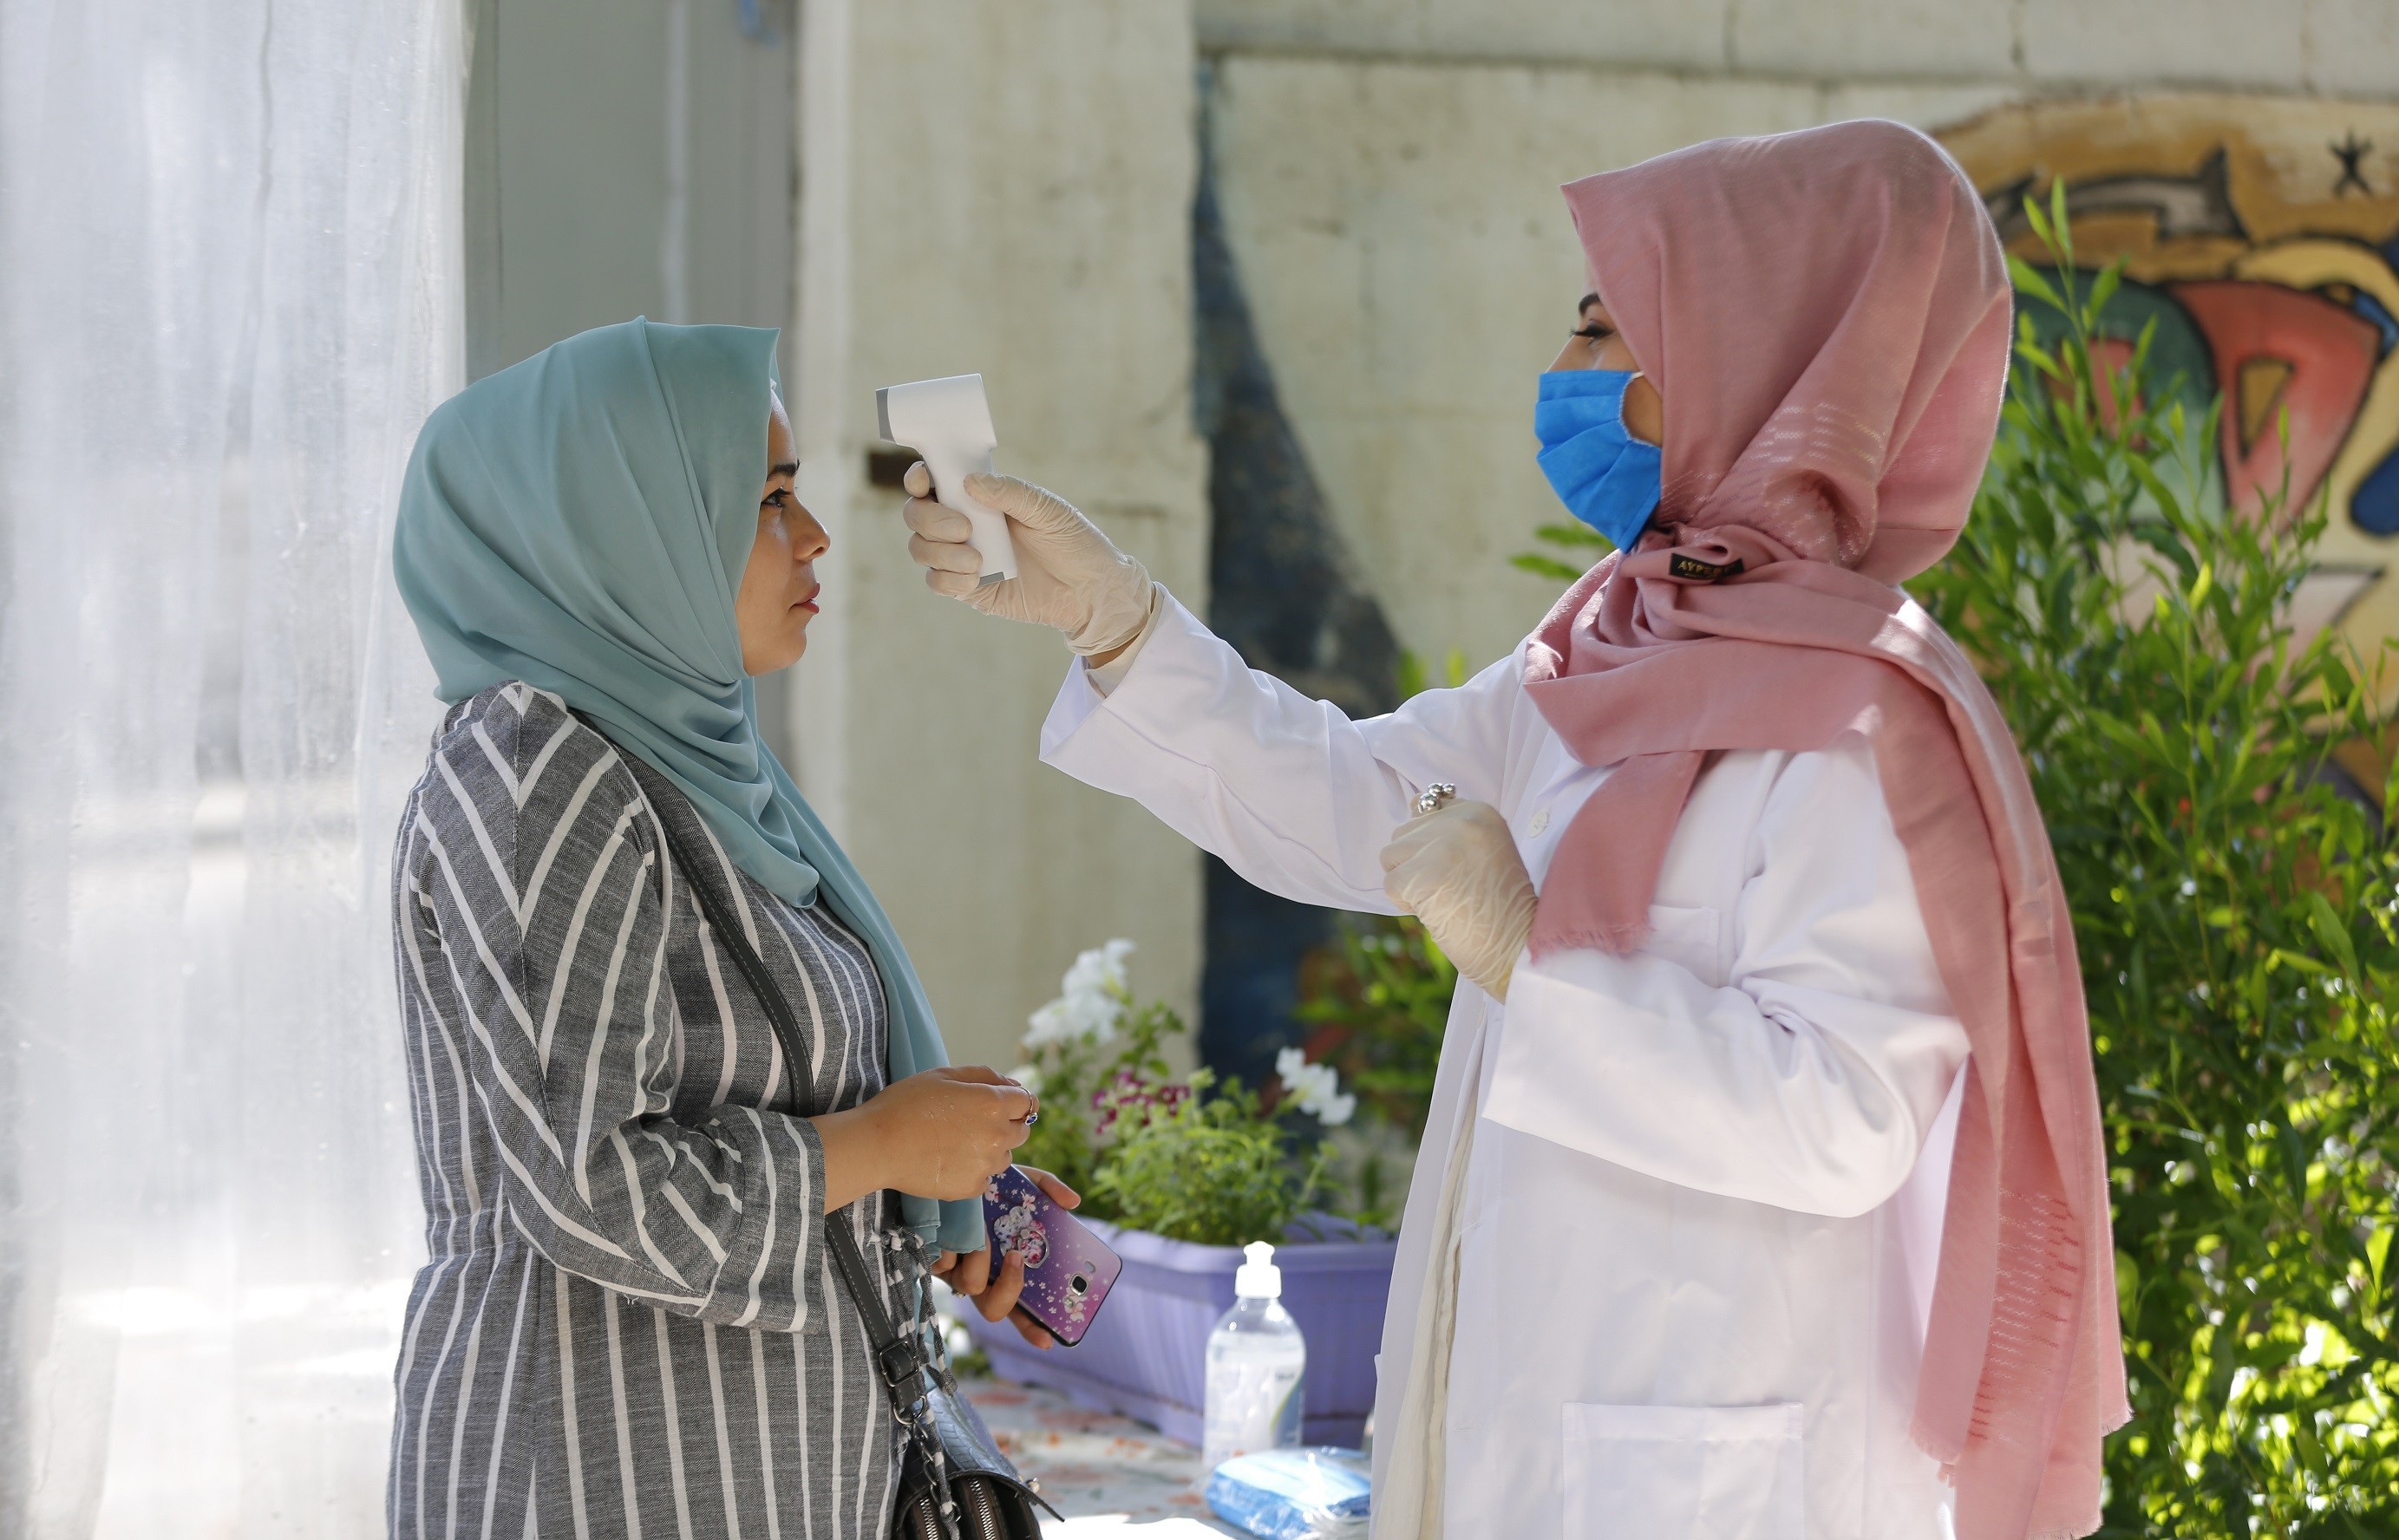  Press House – Palestine (BAS) resumes activities within the procedures of prevention and safety of Corona virus 